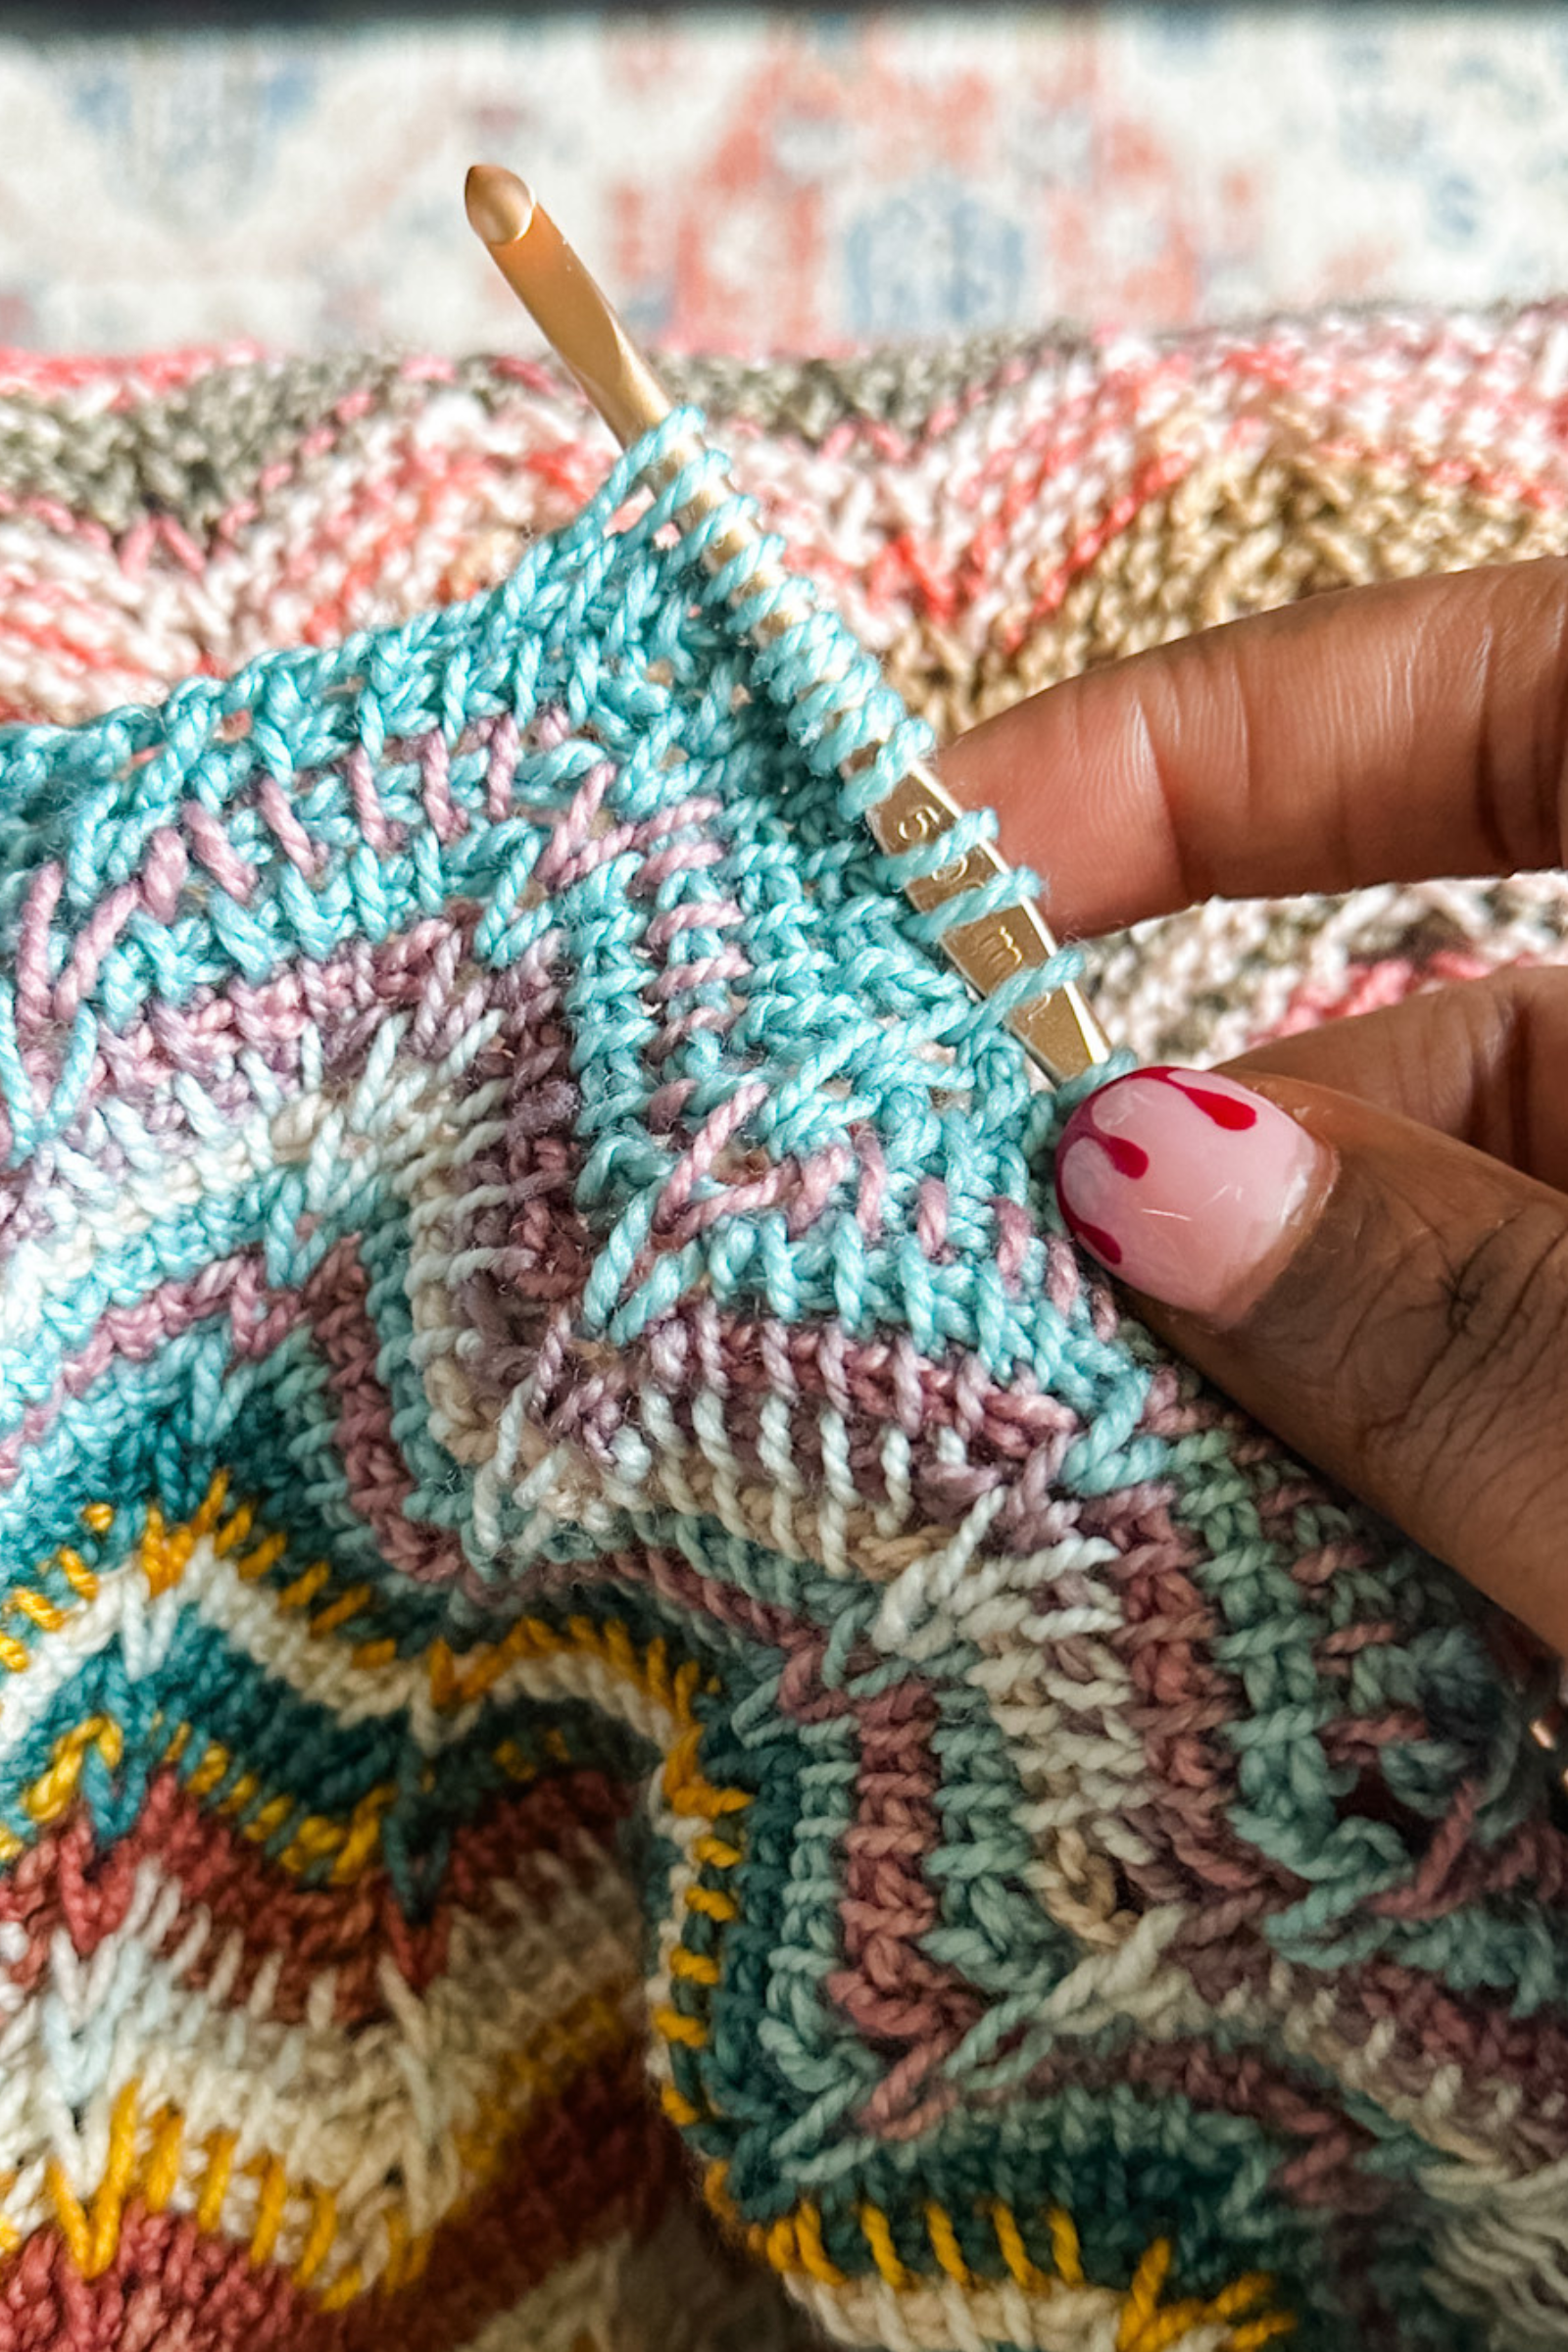 The Best Yarns for Crochet Beginners (And the Worst Ones!)